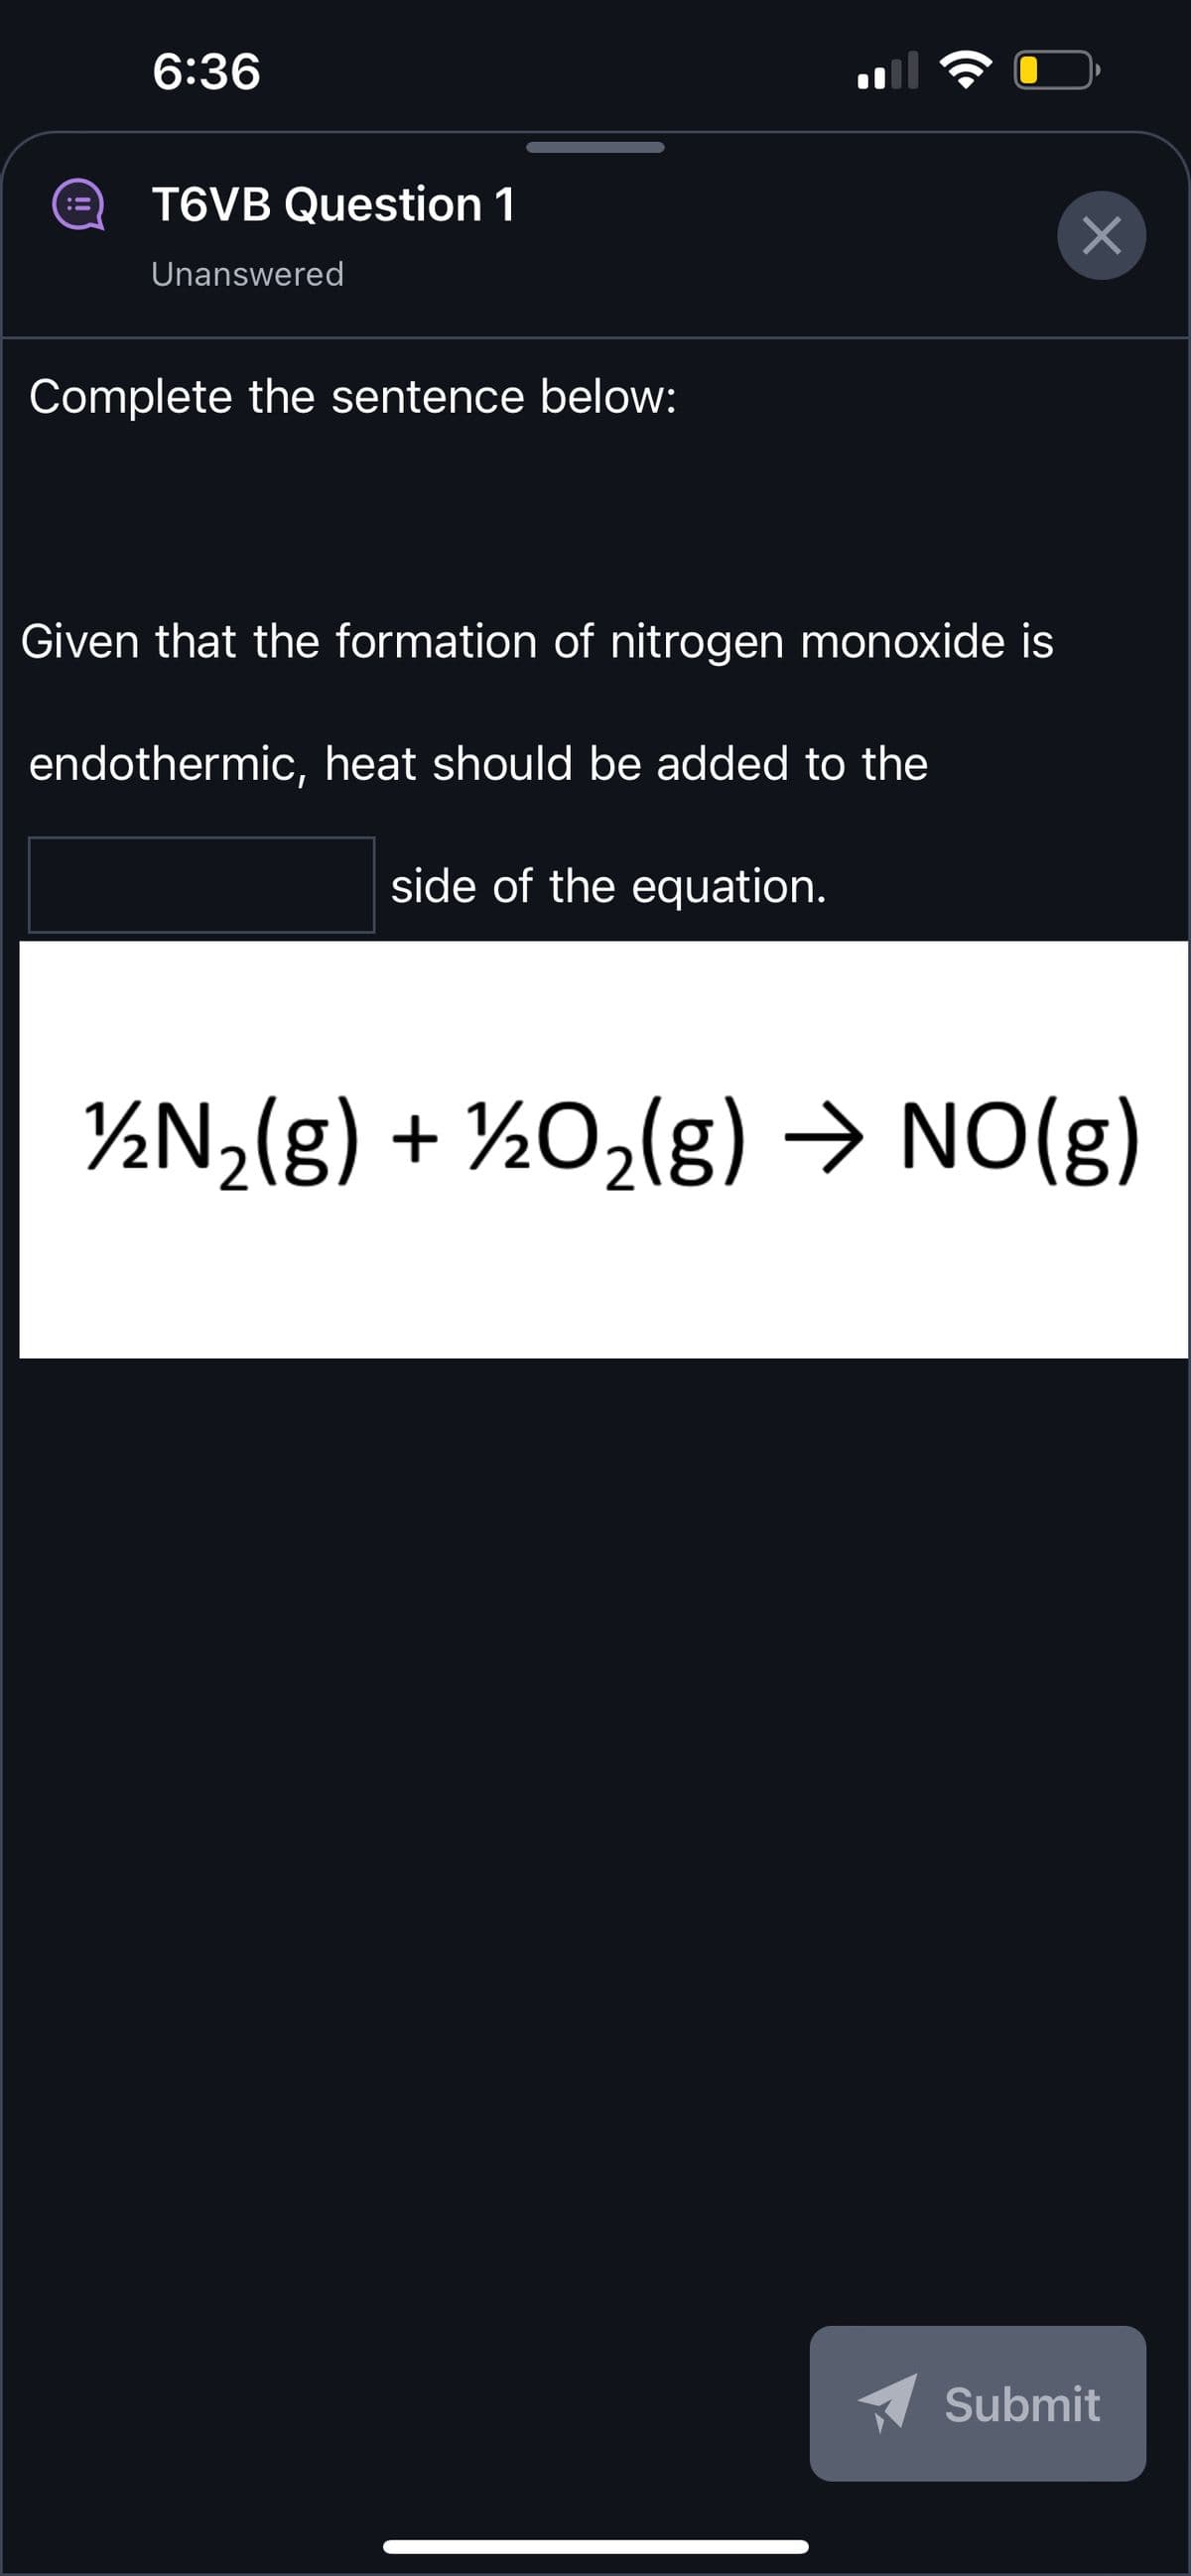 6:36
T6VB Question 1
Unanswered
Complete the sentence below:
Given that the formation of nitrogen monoxide is
endothermic, heat should be added to the
side of the equation.
×
½N₂(g) + ½O₂(g) → NO(g)
Submit